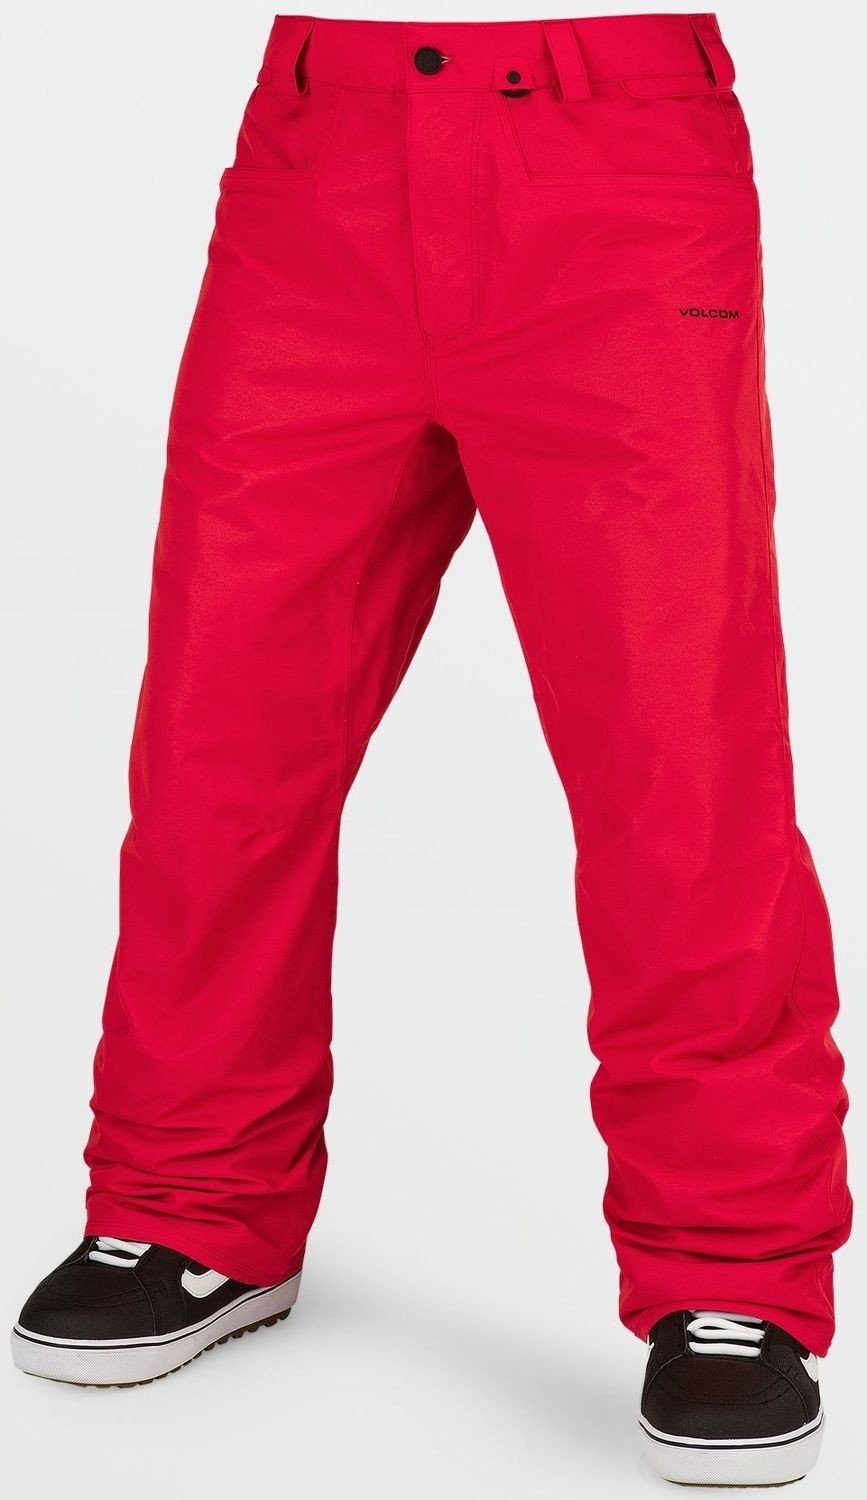 Volcom Carbon Red Mens Snowboard Pant